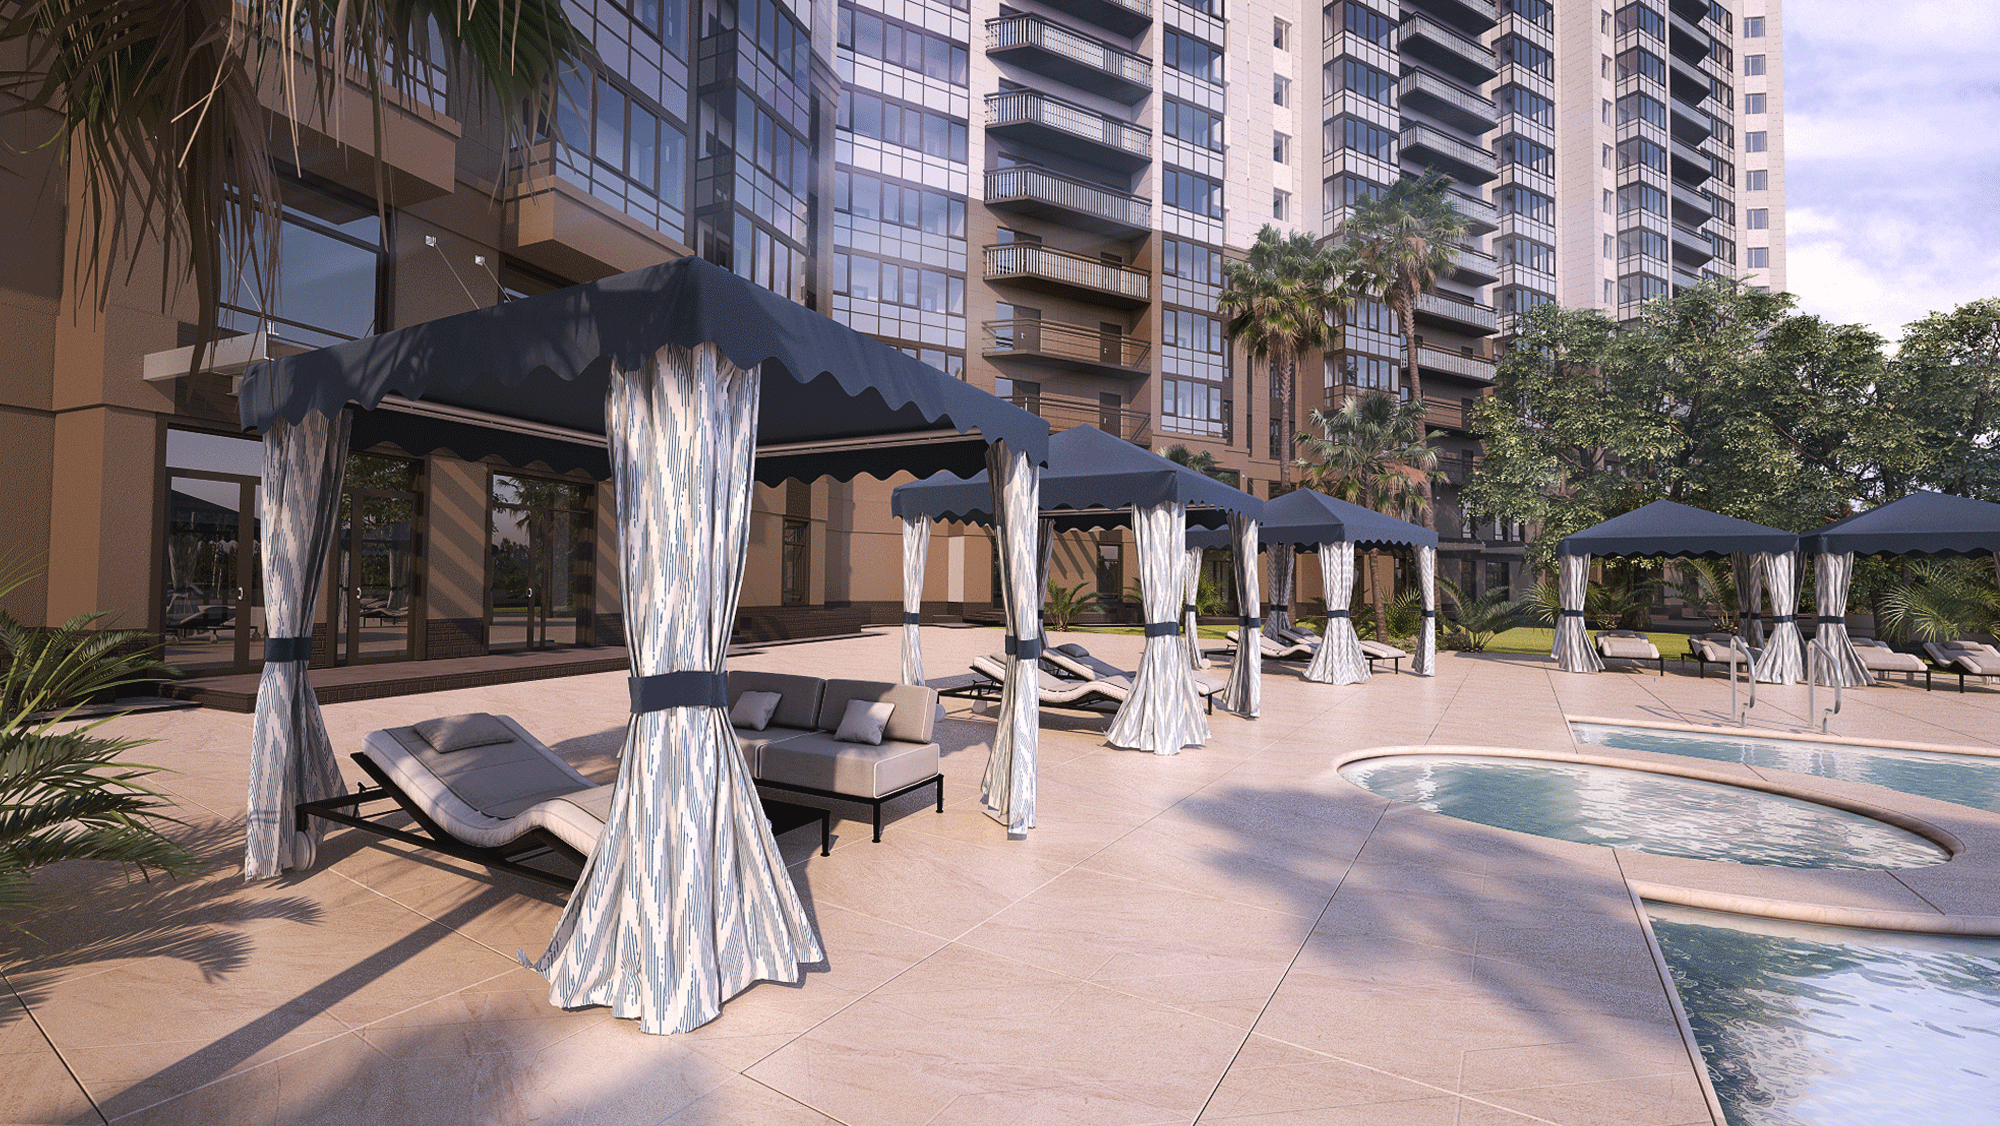 Academy Design's Executive cabana, perspective view, emphasizing its corrosion-resistant 6061-T6 aluminum frame and elegant marine-grade fabric peaked roof with a loose valance. The mock curtains, crafted from marine-grade upholstery fabric, gracefully wrap around the cabana's posts, blending style and functionality for premium outdoor spaces.